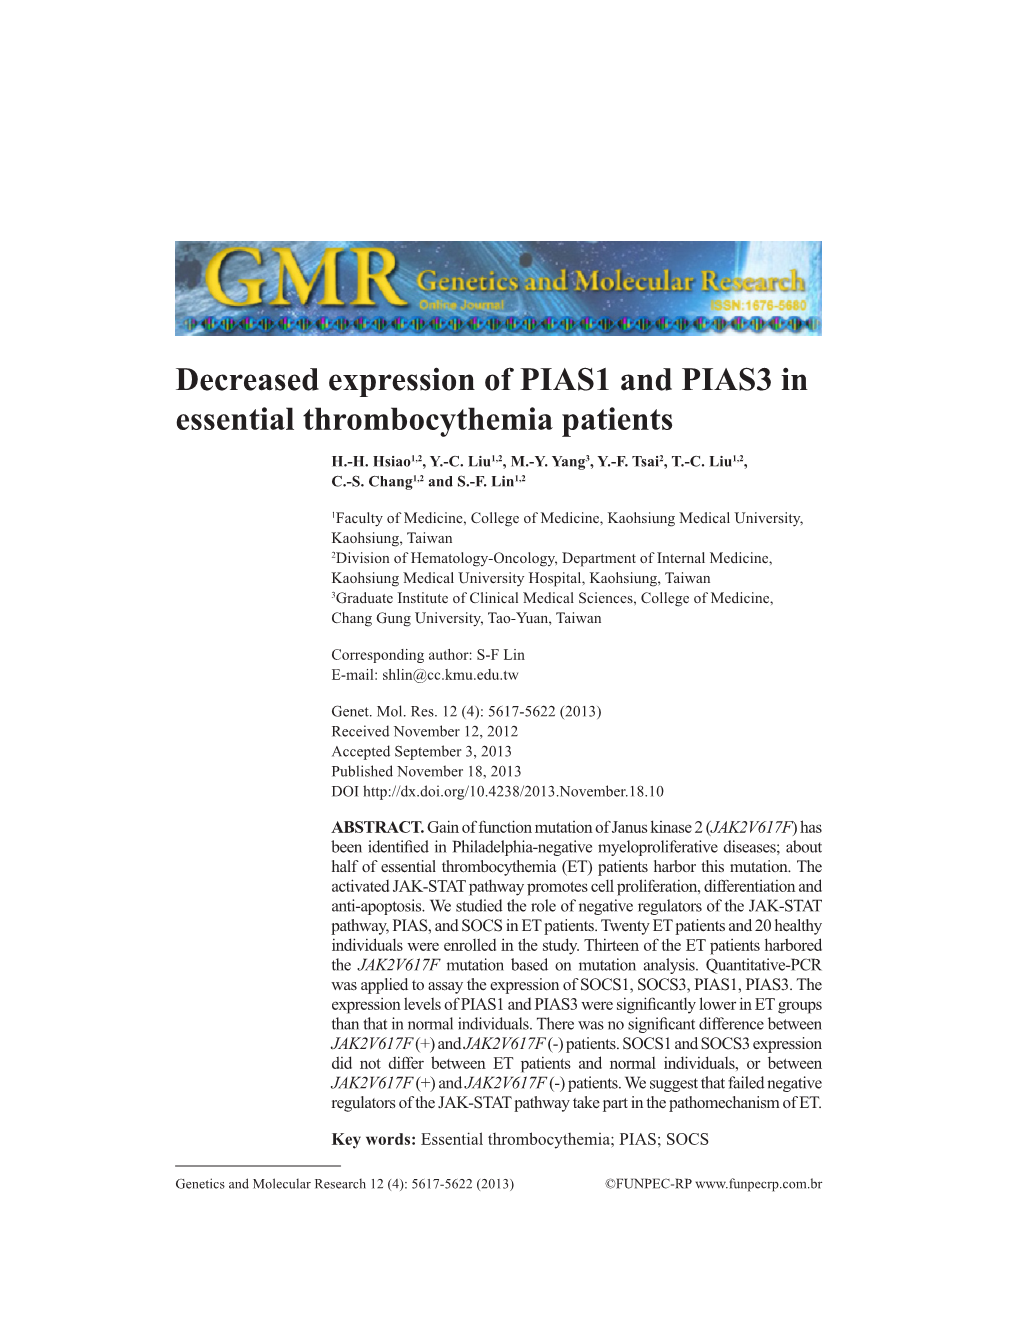 Decreased Expression of PIAS1 and PIAS3 in Essential Thrombocythemia Patients